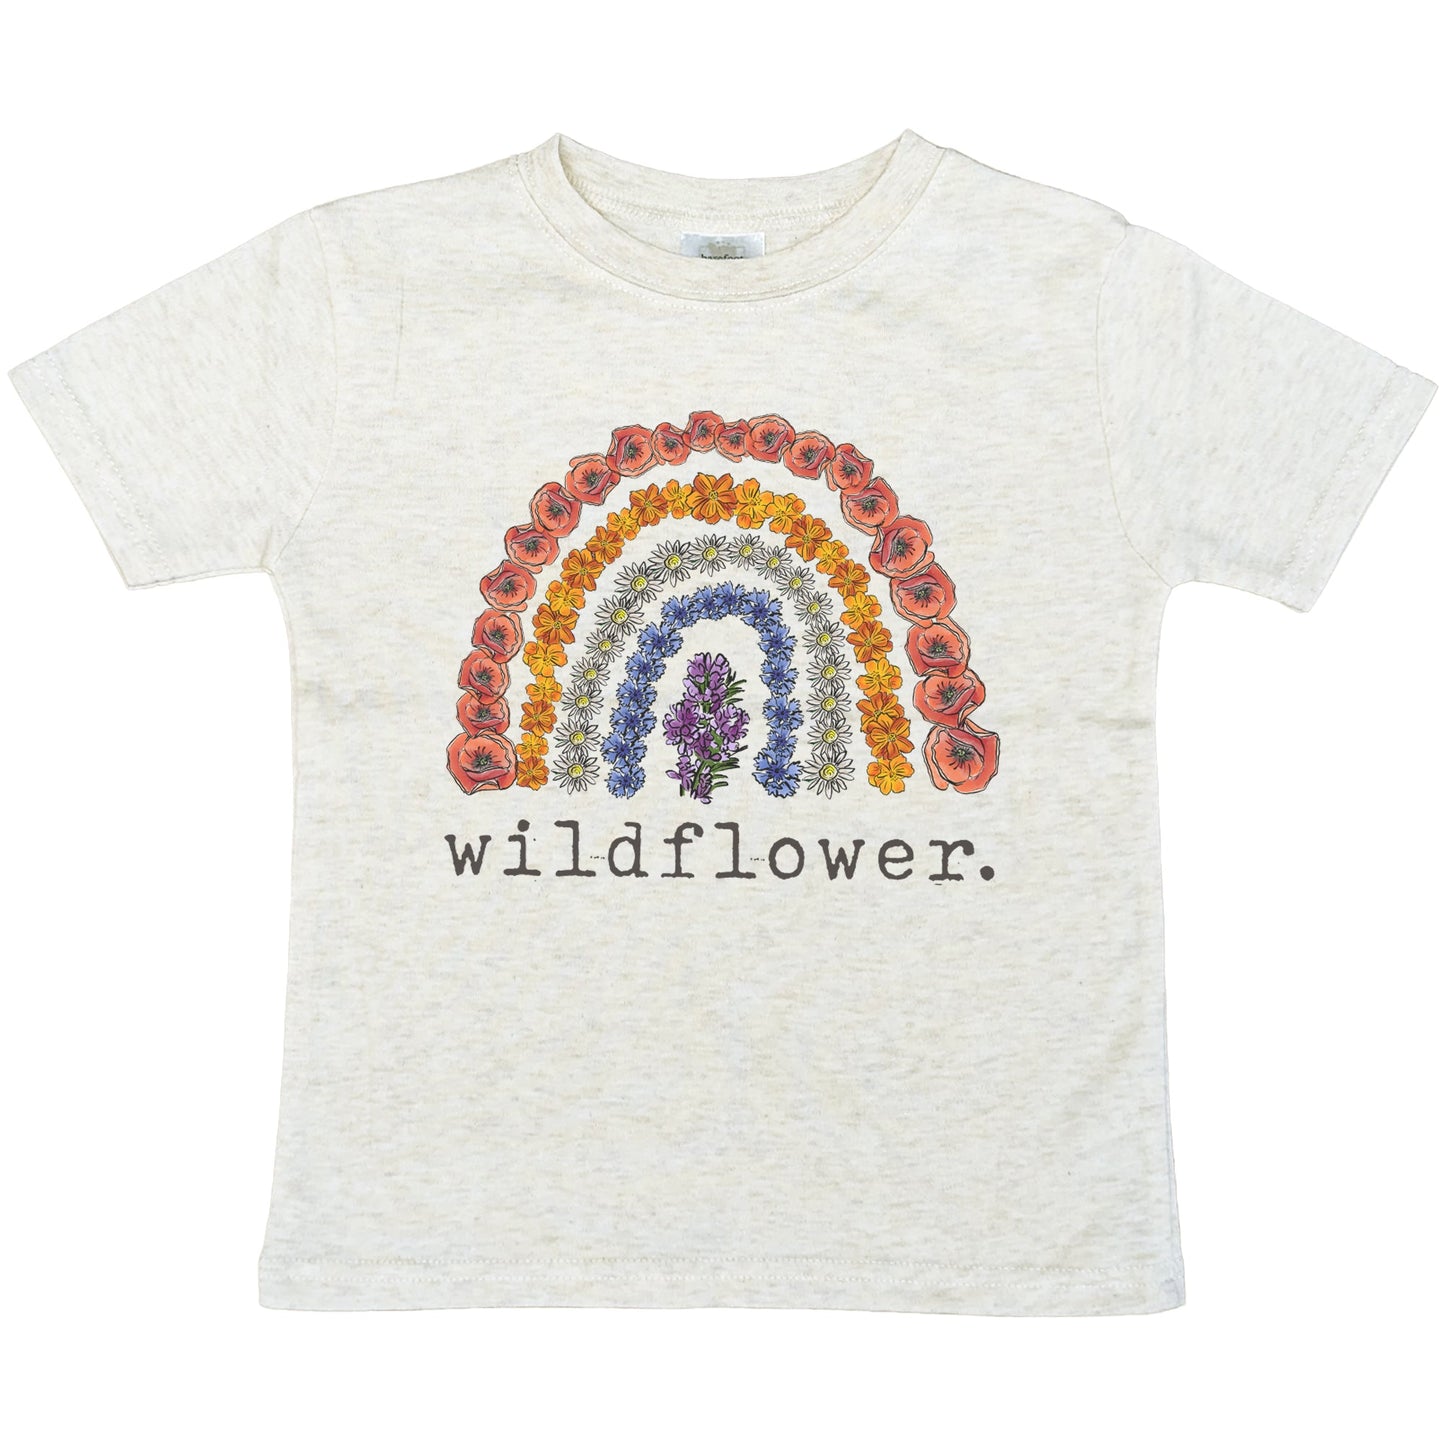 "Wildflower" Sleep 'n Play Set | Size 2T through 5T | Includes Shirt & Joggers